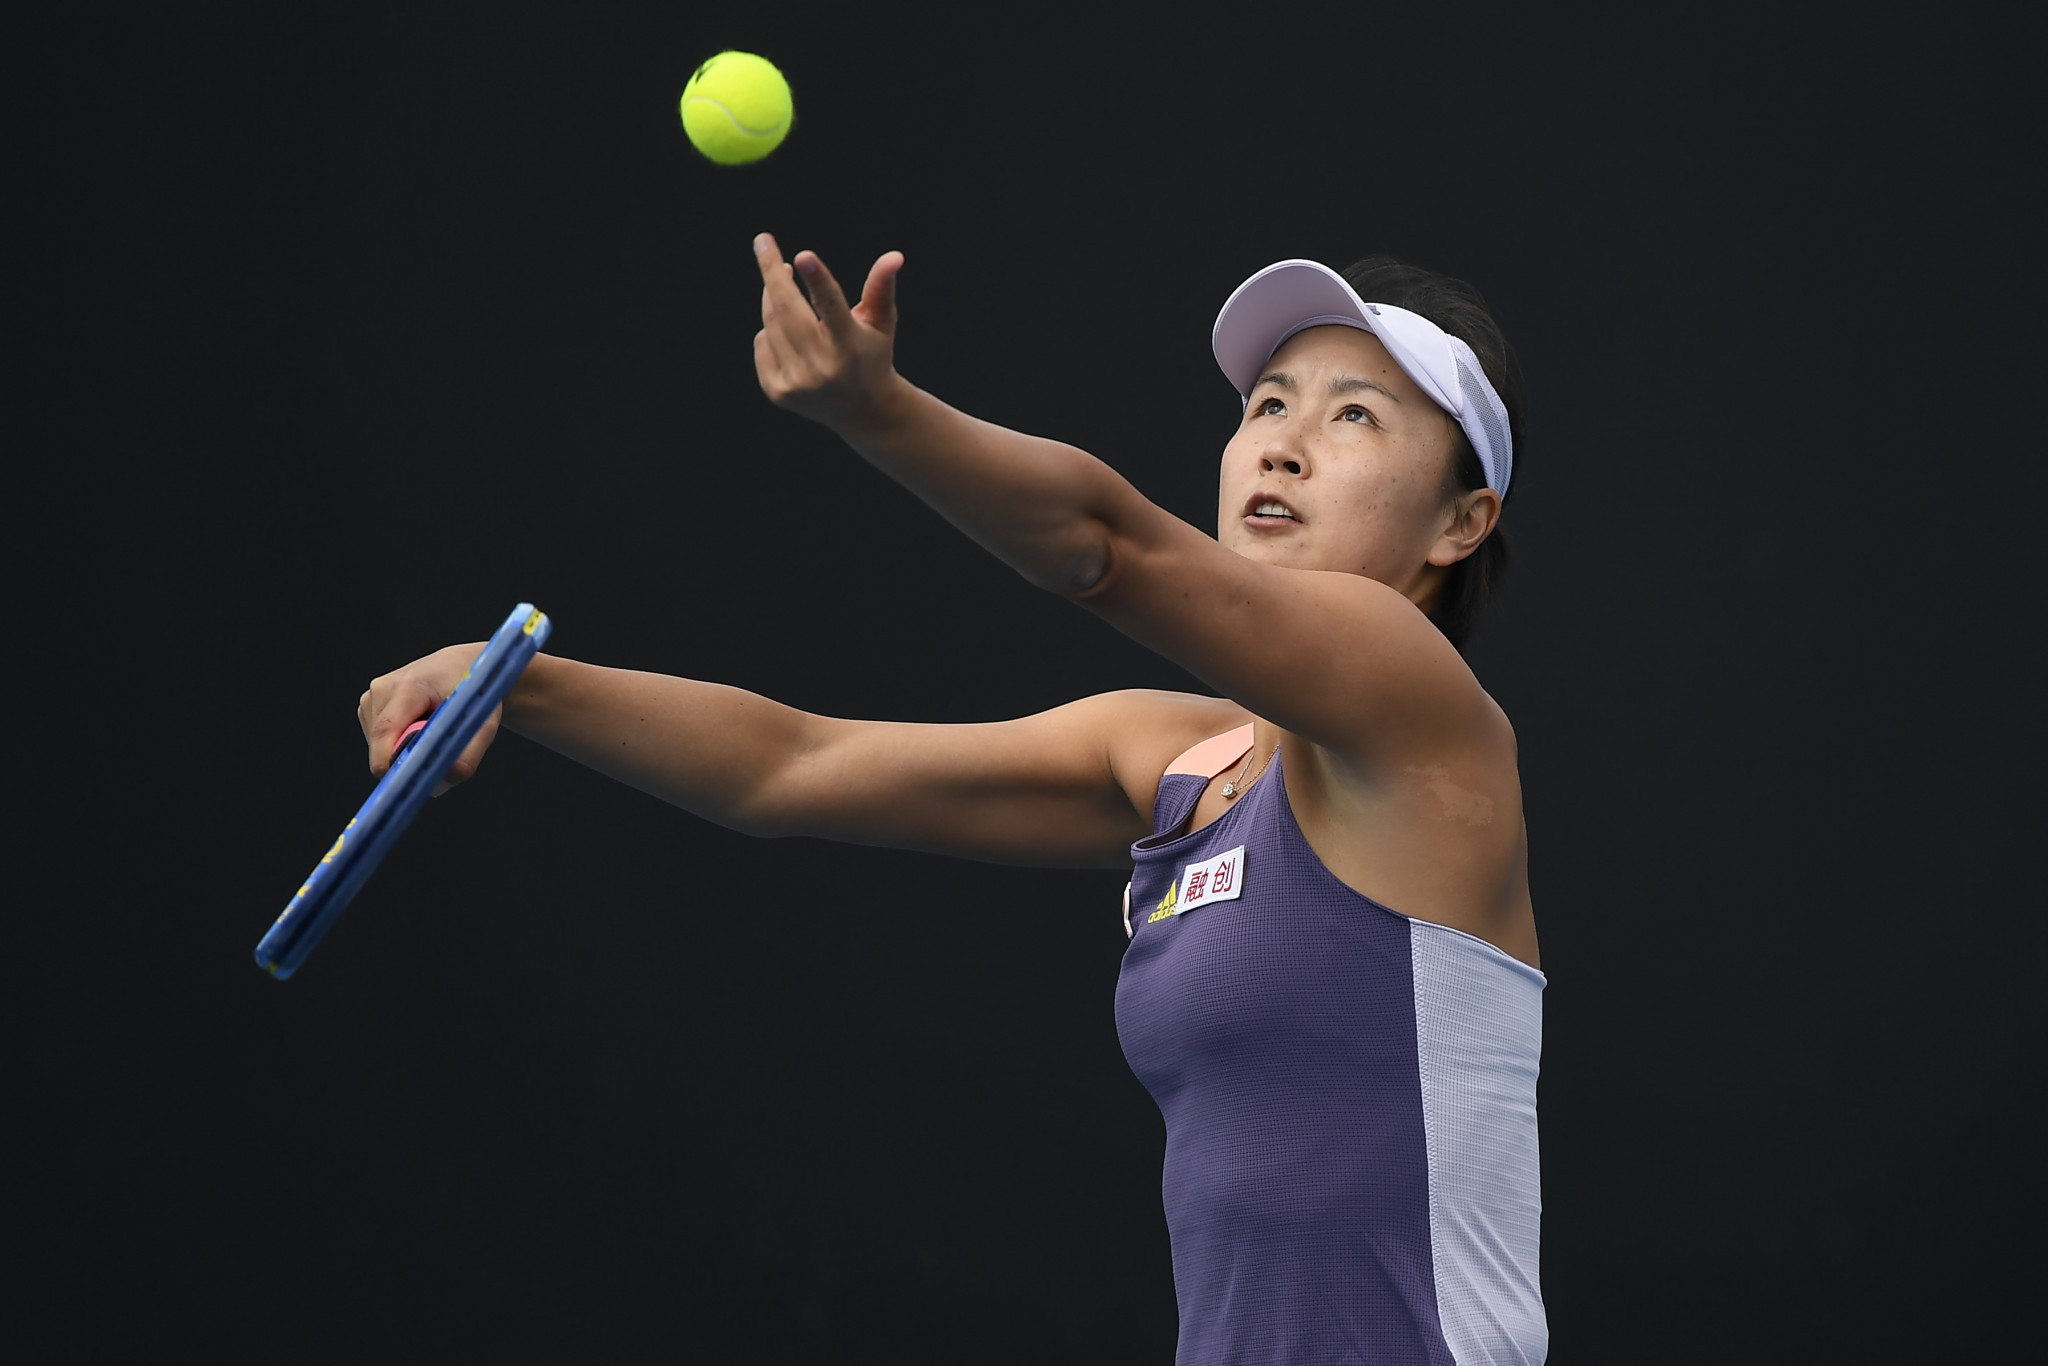 The IOC claims Peng Shuai is set to meet President Thomas Bach during the 2022 Winter Olympics in Beijing ©Getty Images